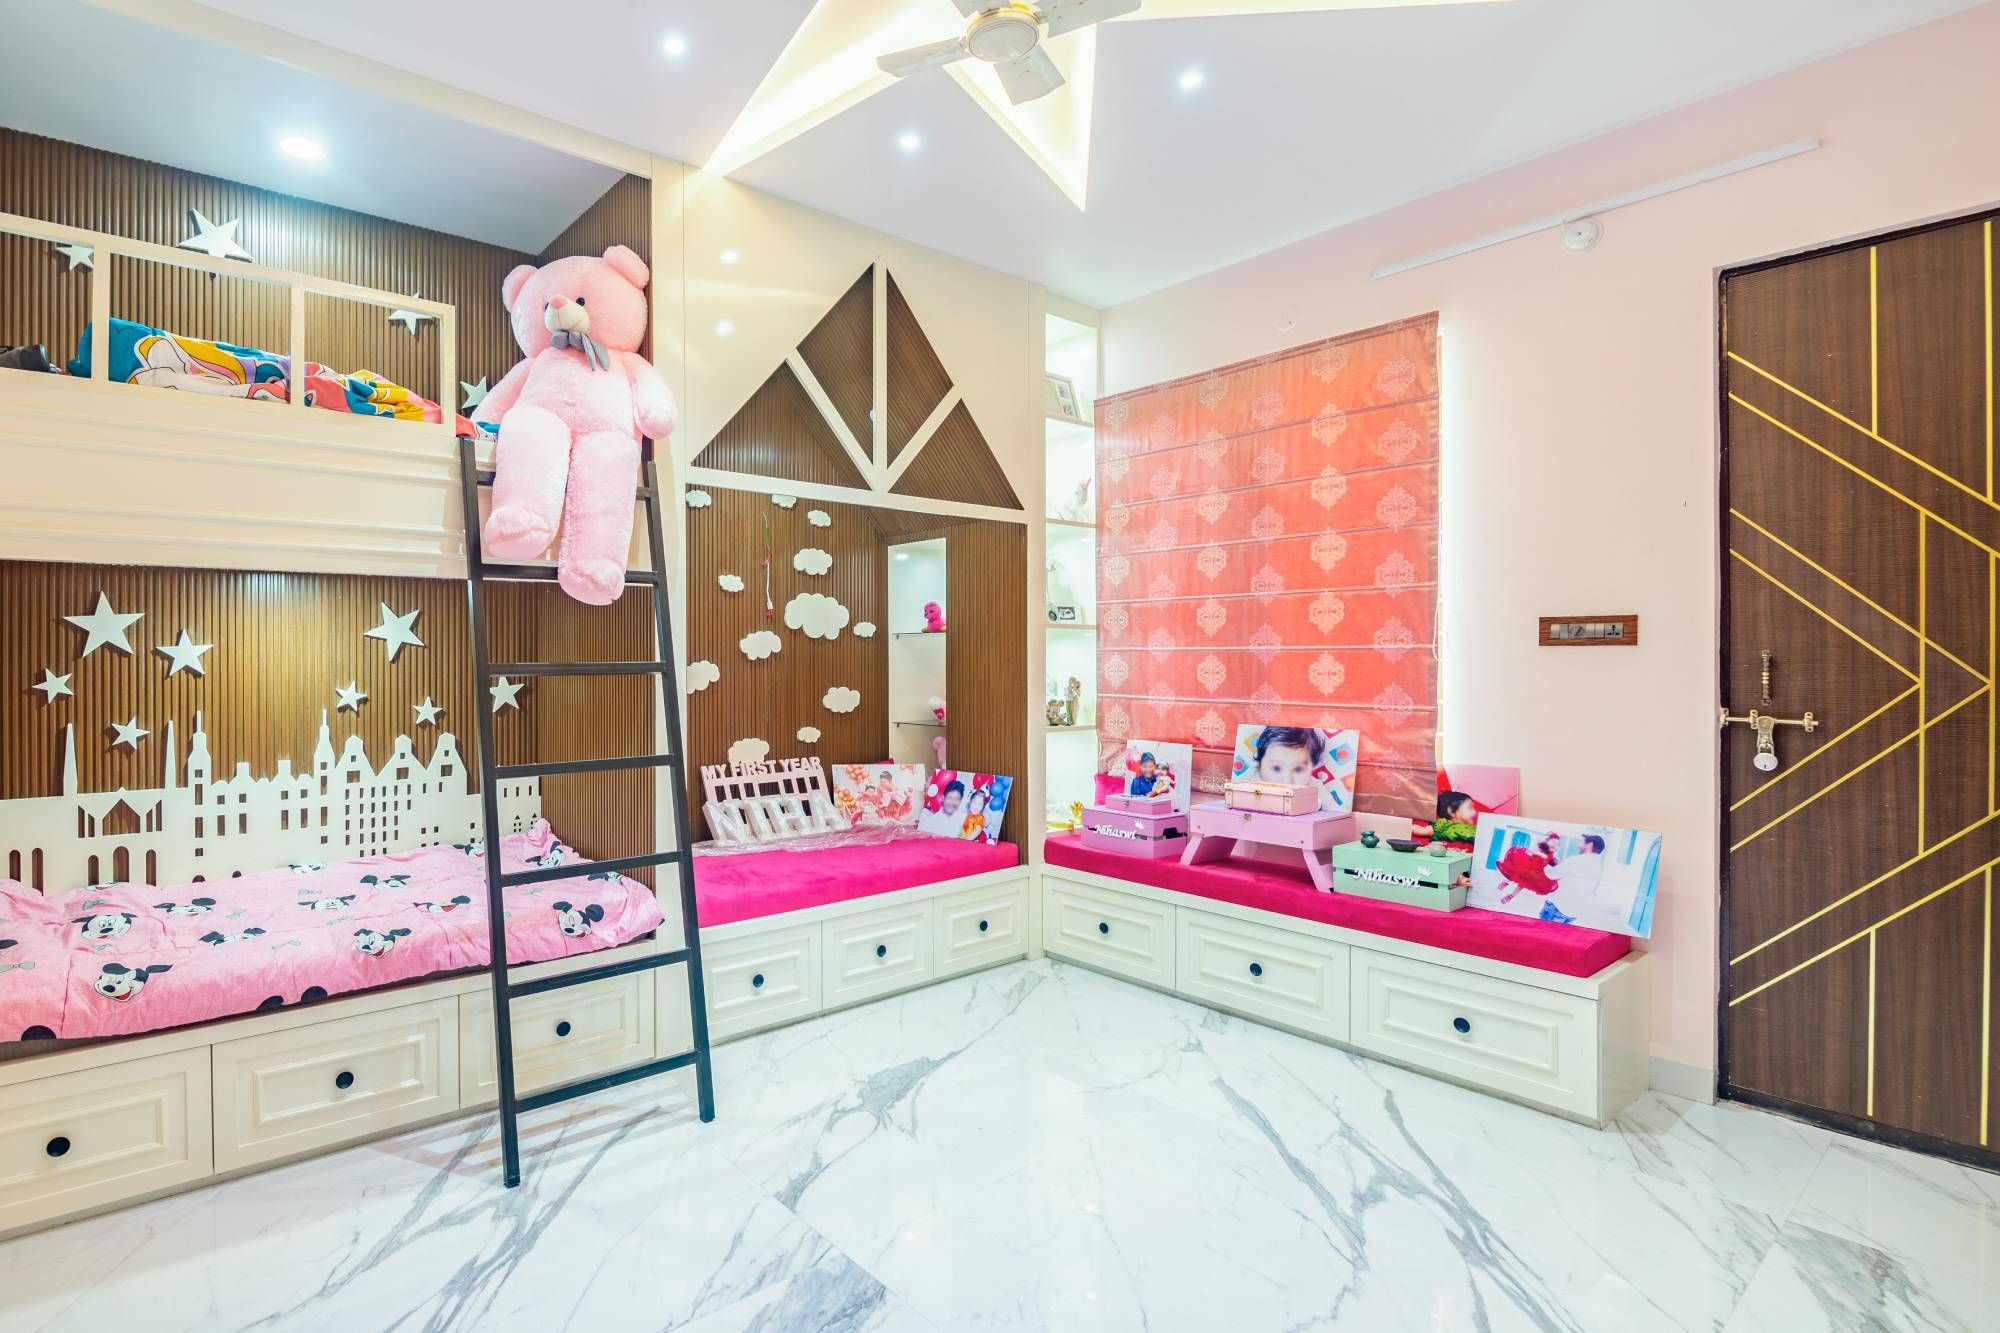 Modern Kids Bedroom Design With Marble Flooring And Wooden Fluted Wall Panelling